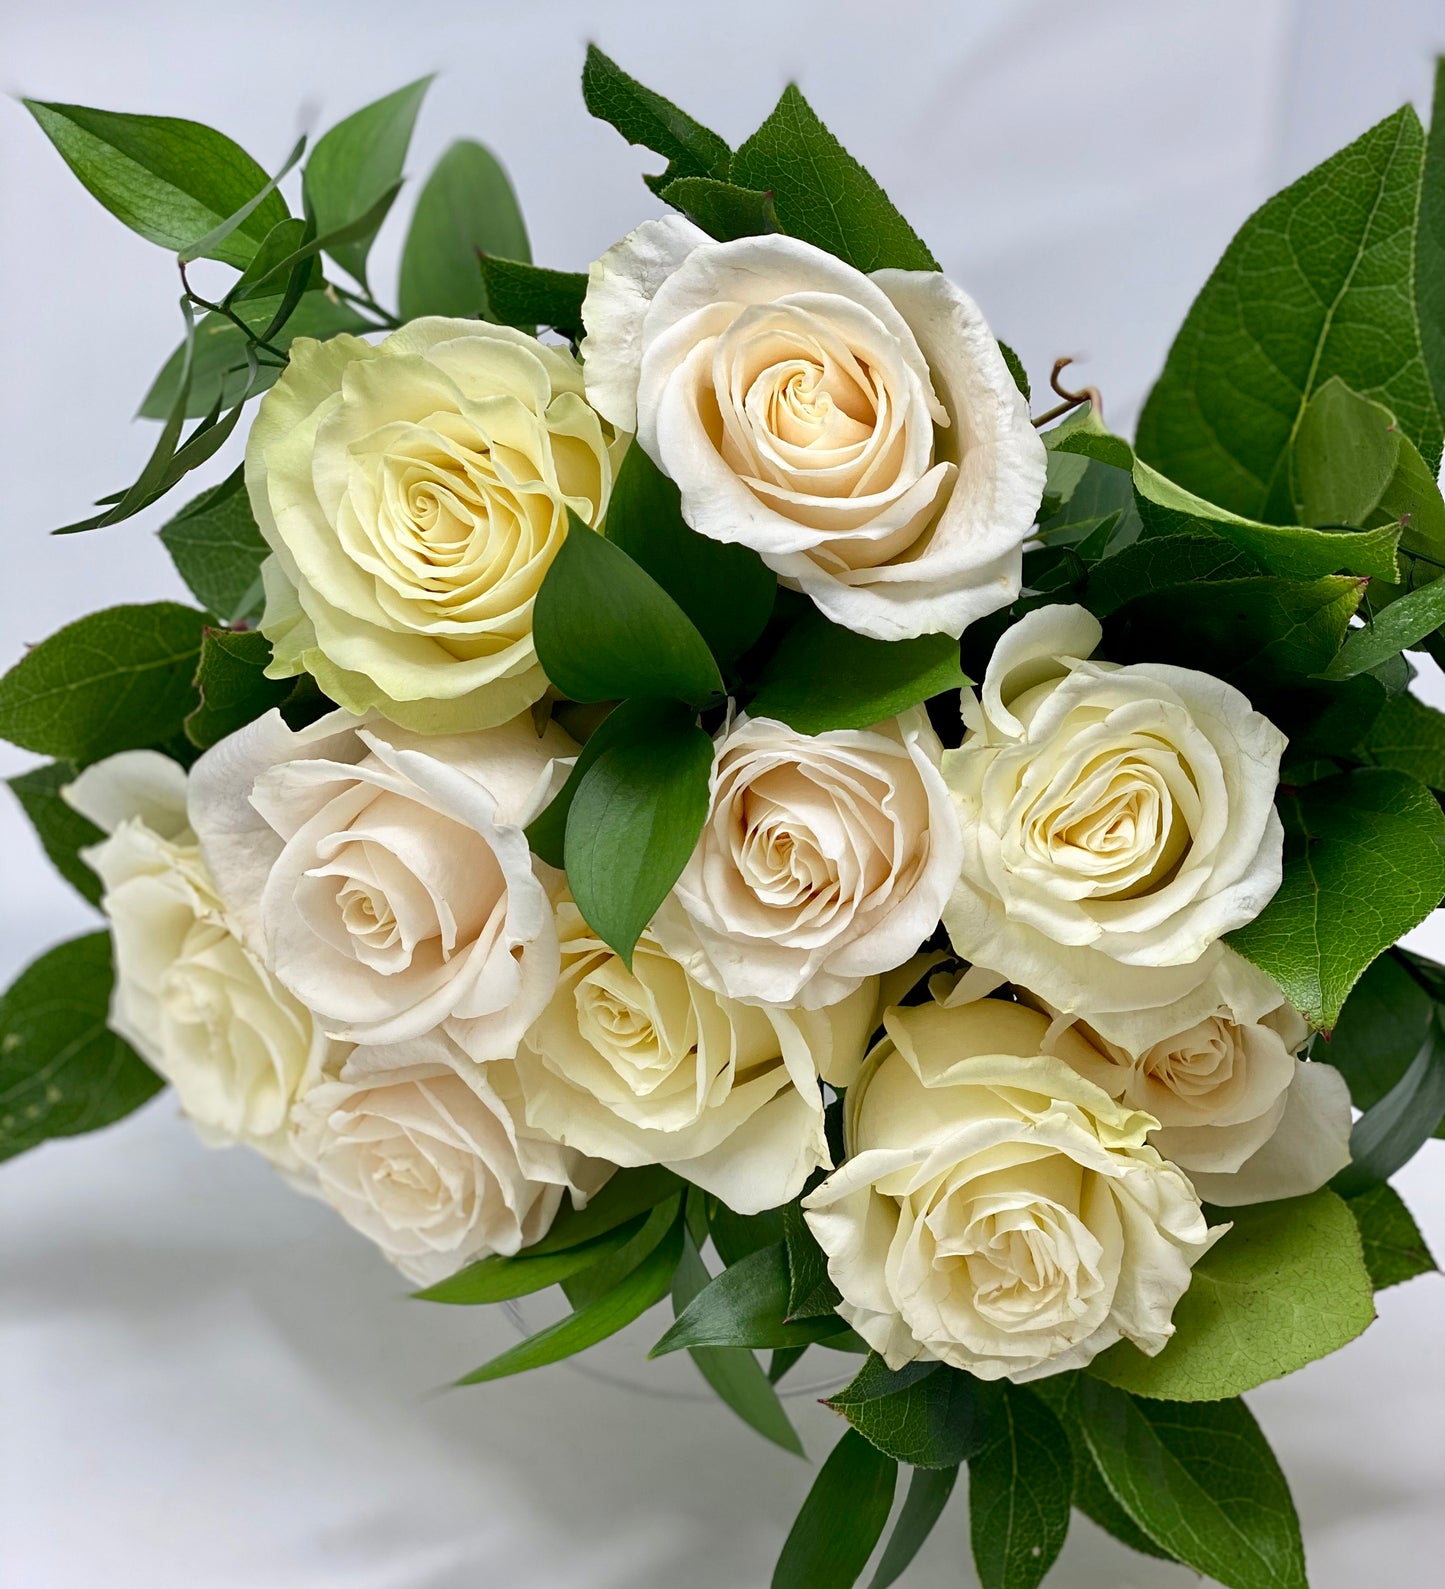 White roses arranged in a bouquet with greens